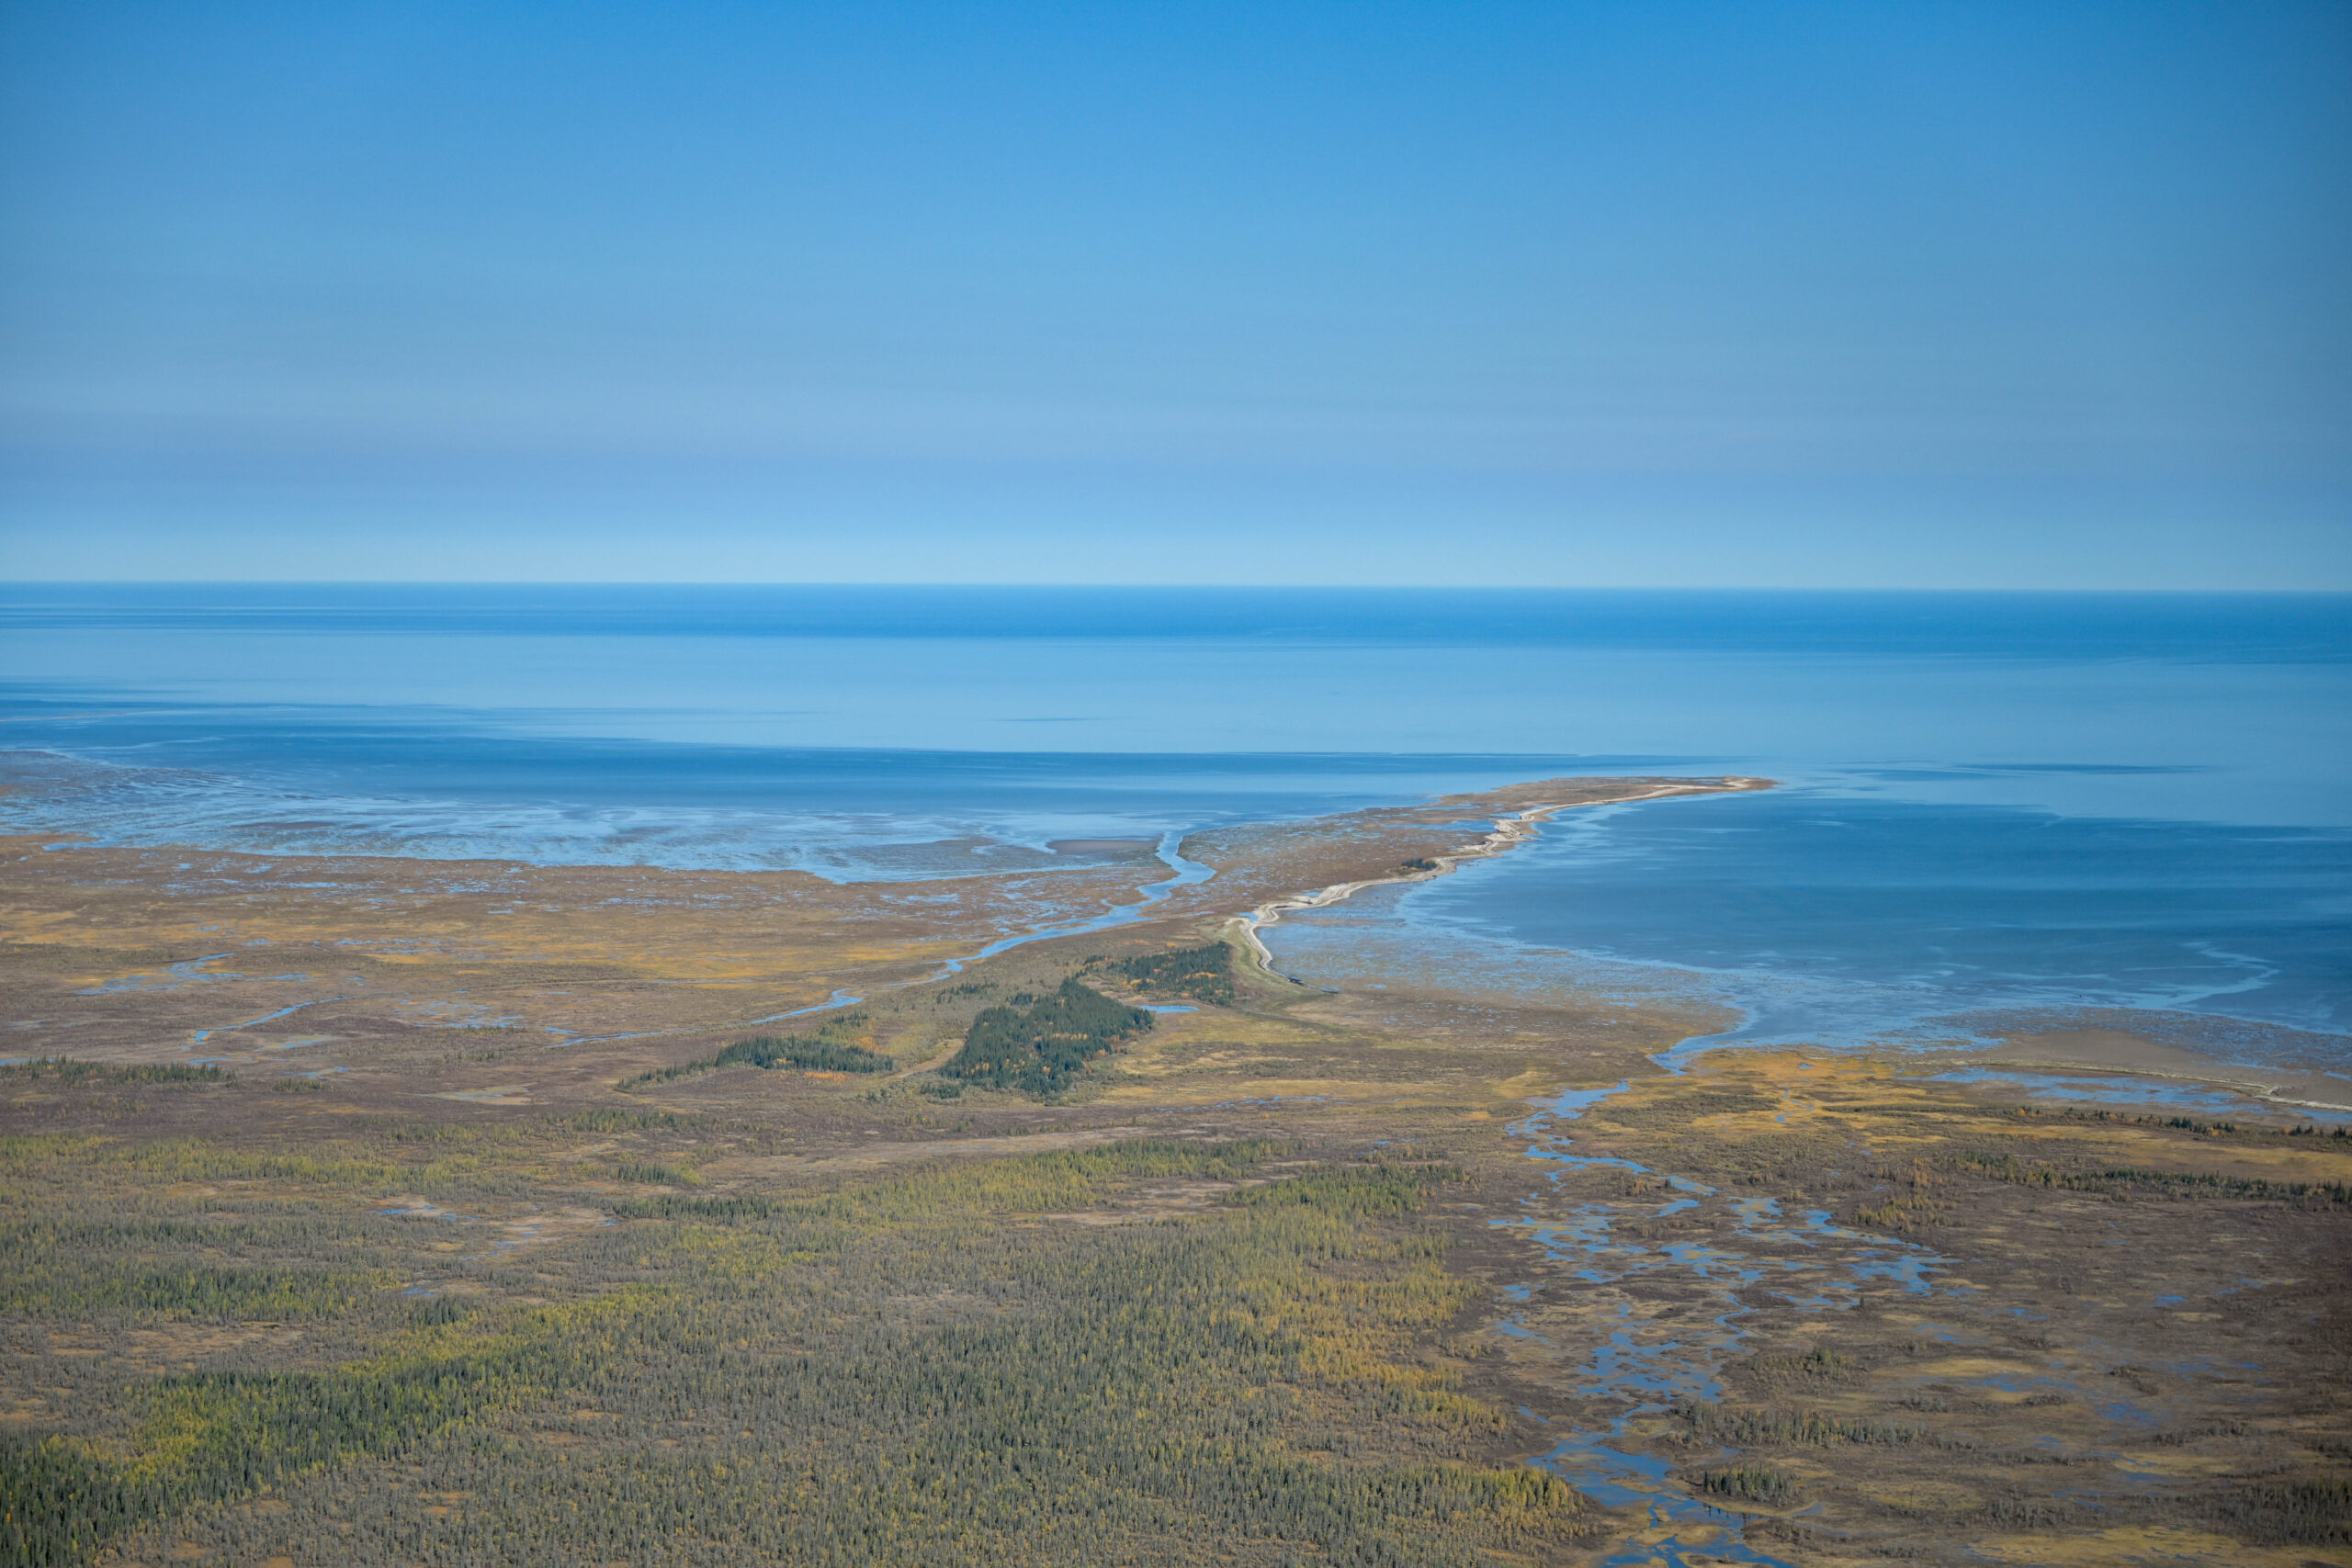 Hudson Bay lowlands featured in presentation at Timmins Museum on